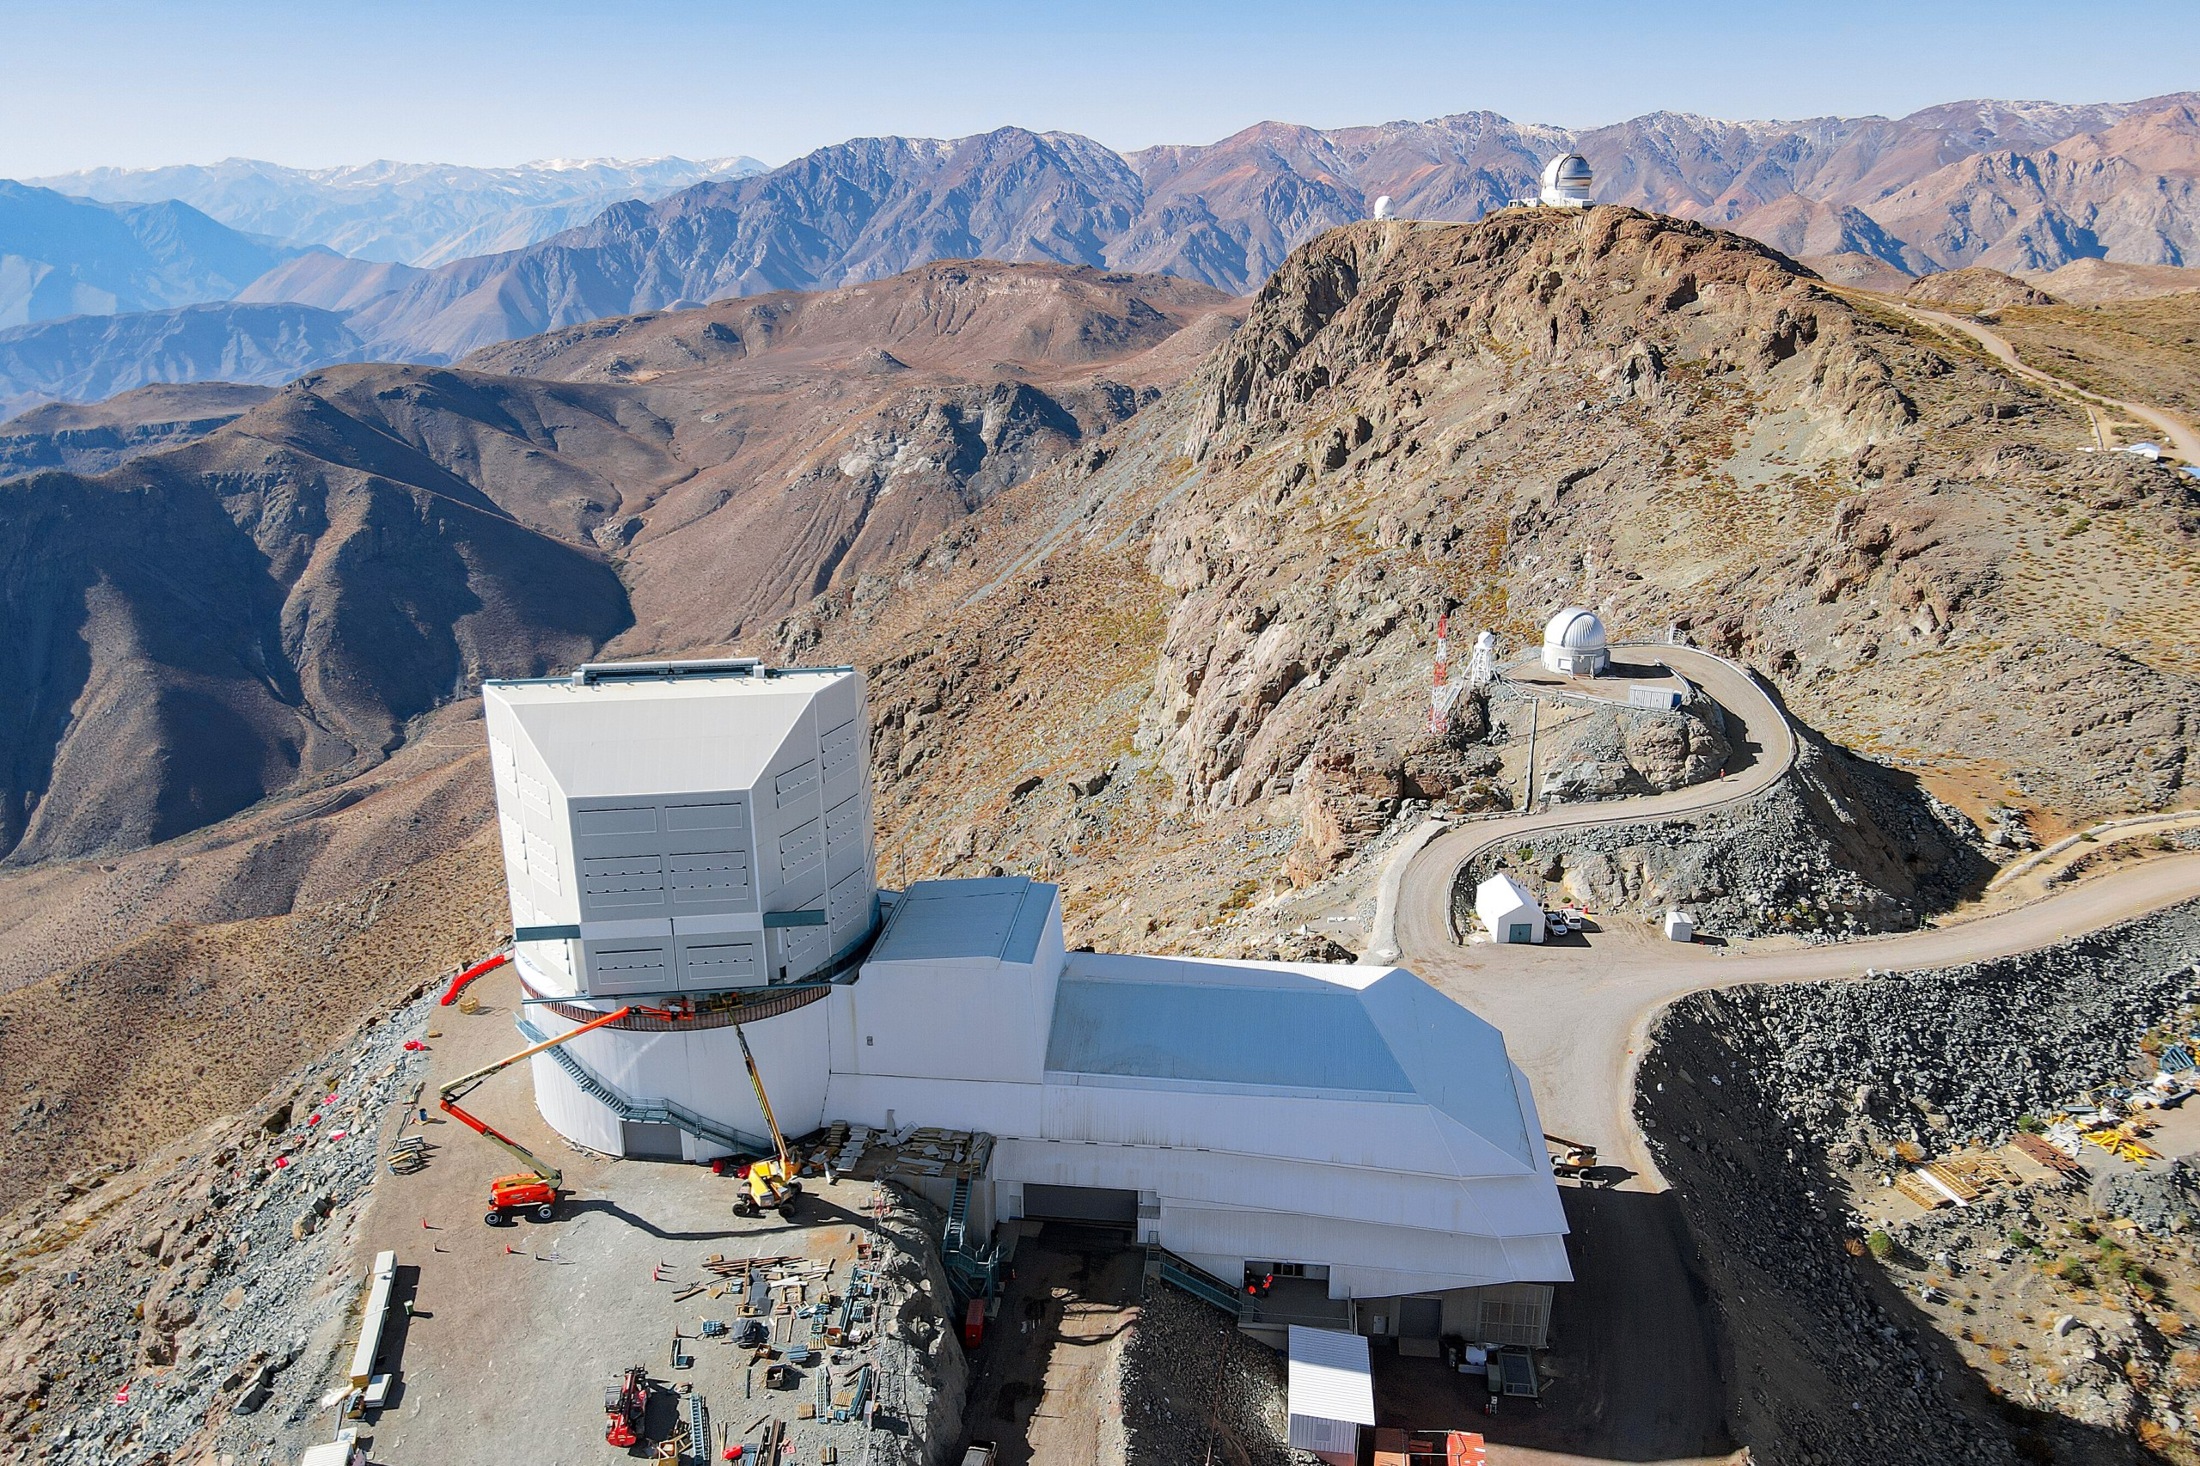 The LSST at Chile's Rubin Observatory is set for 2022 premiere.